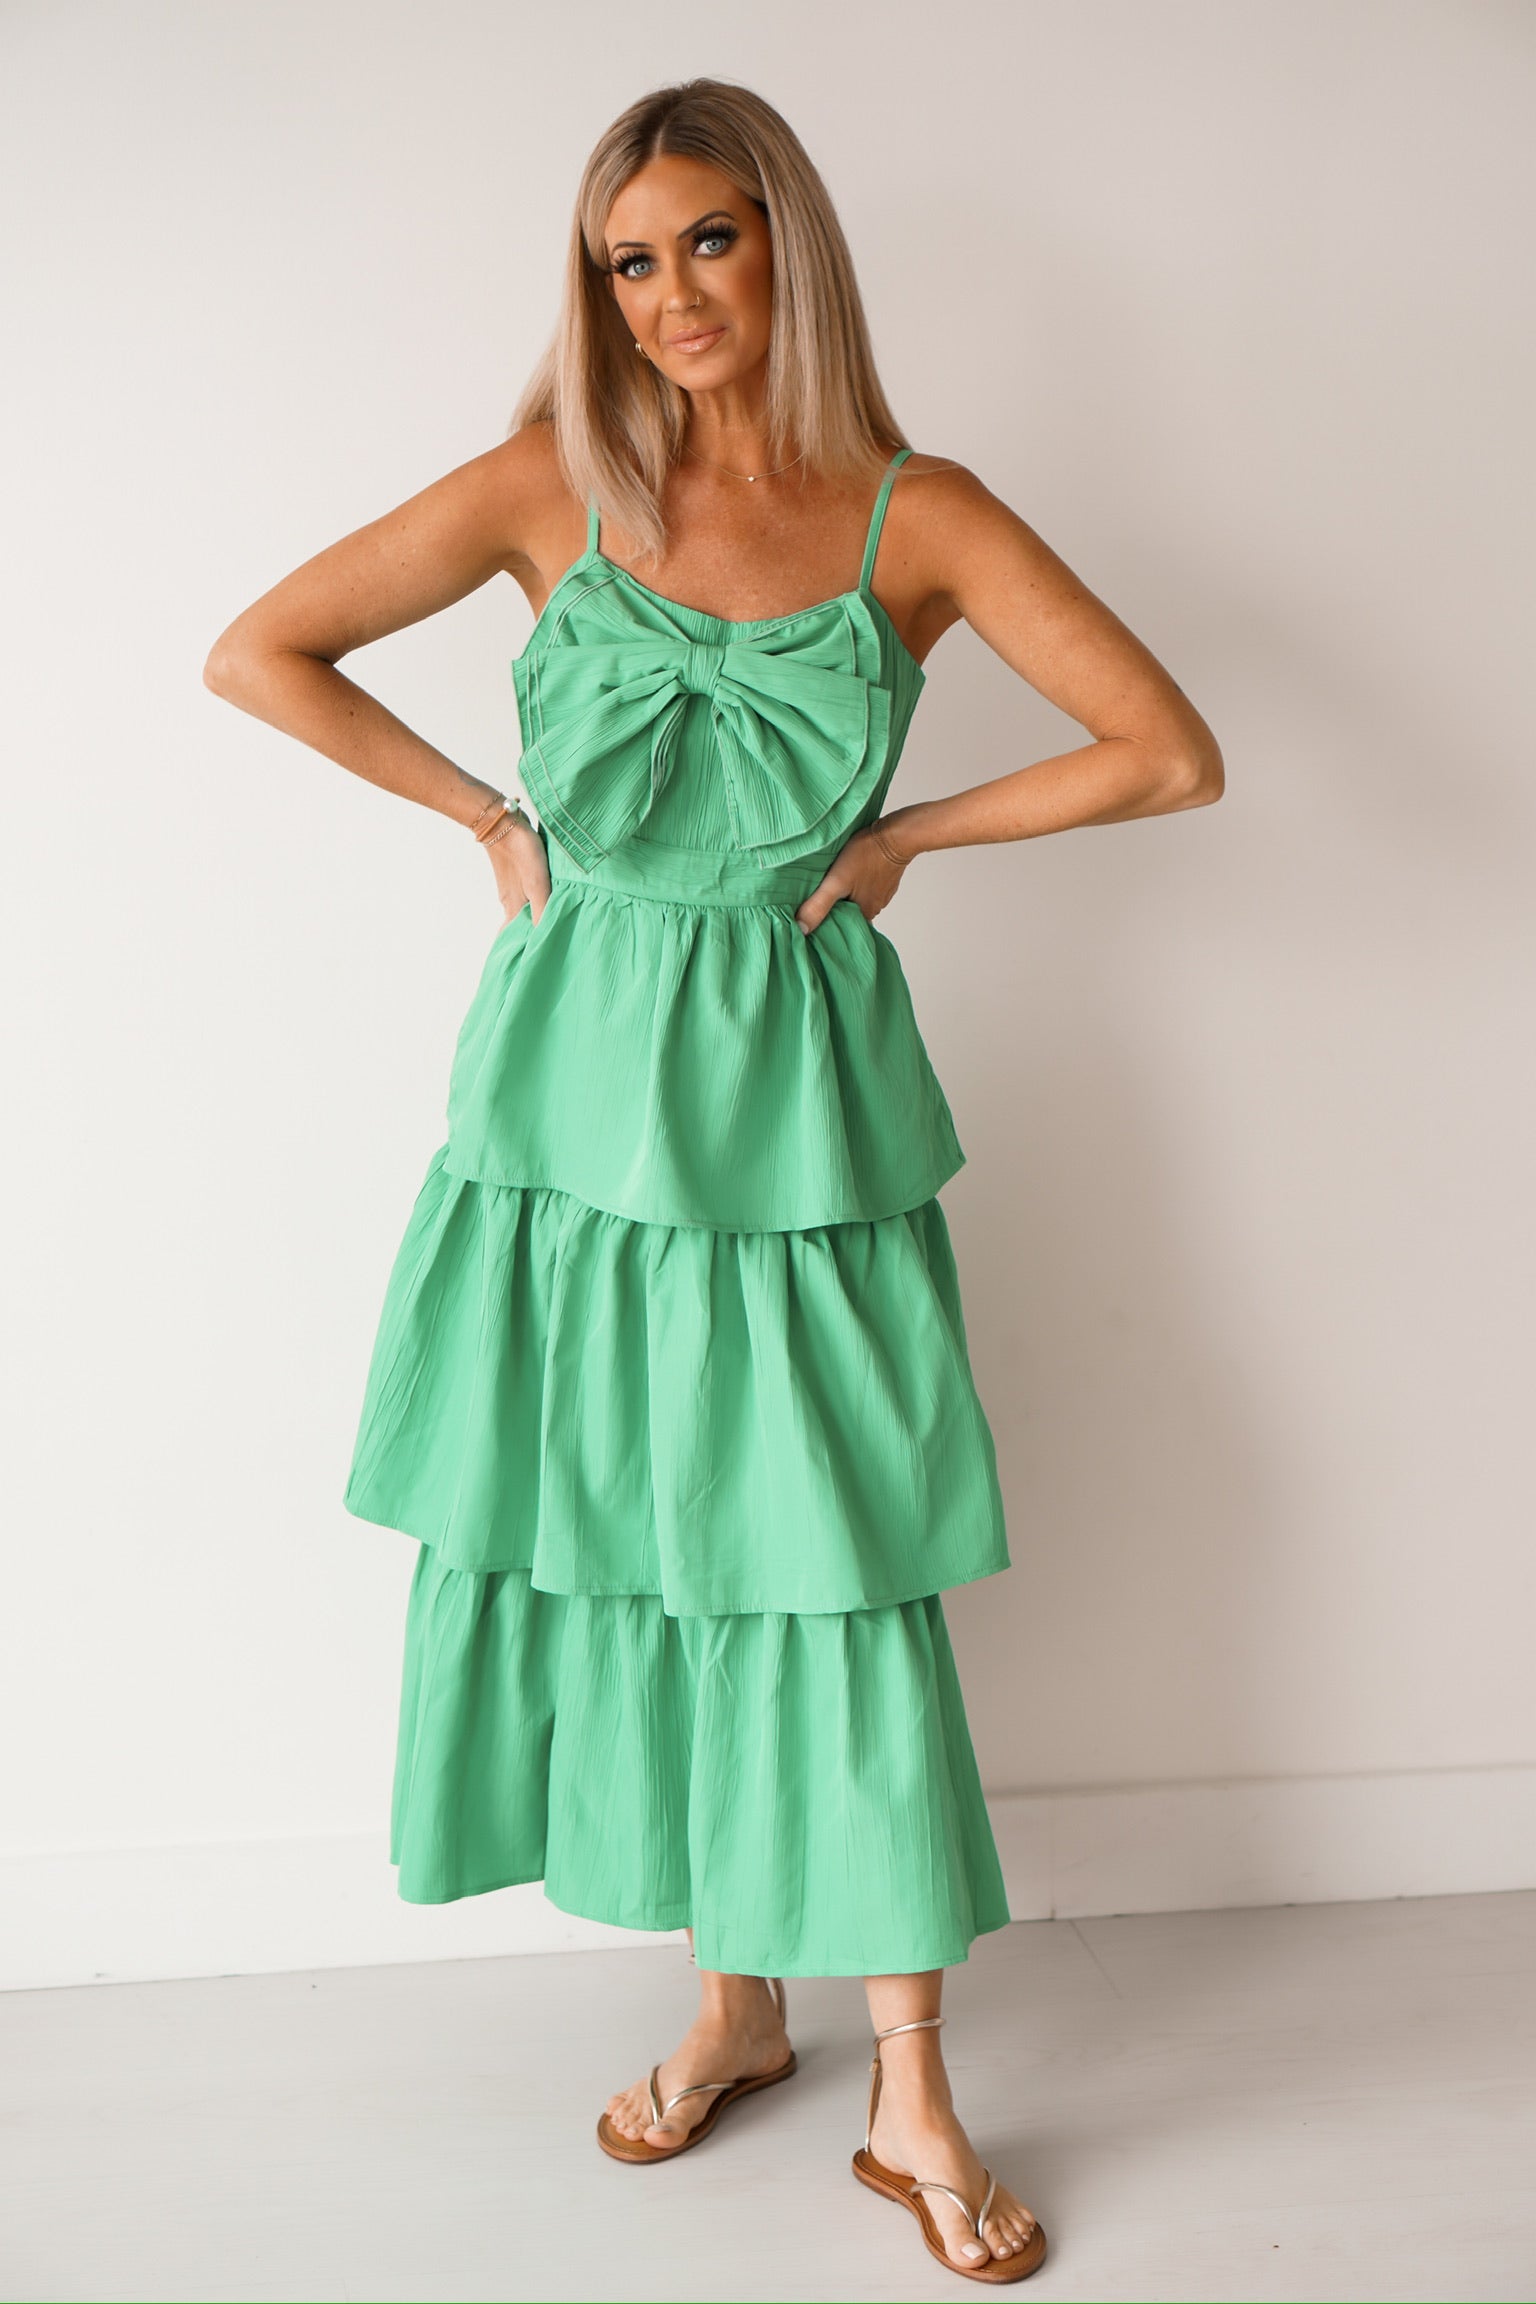 girl standing with her legs crossed wearing a green long bow dress with sandals